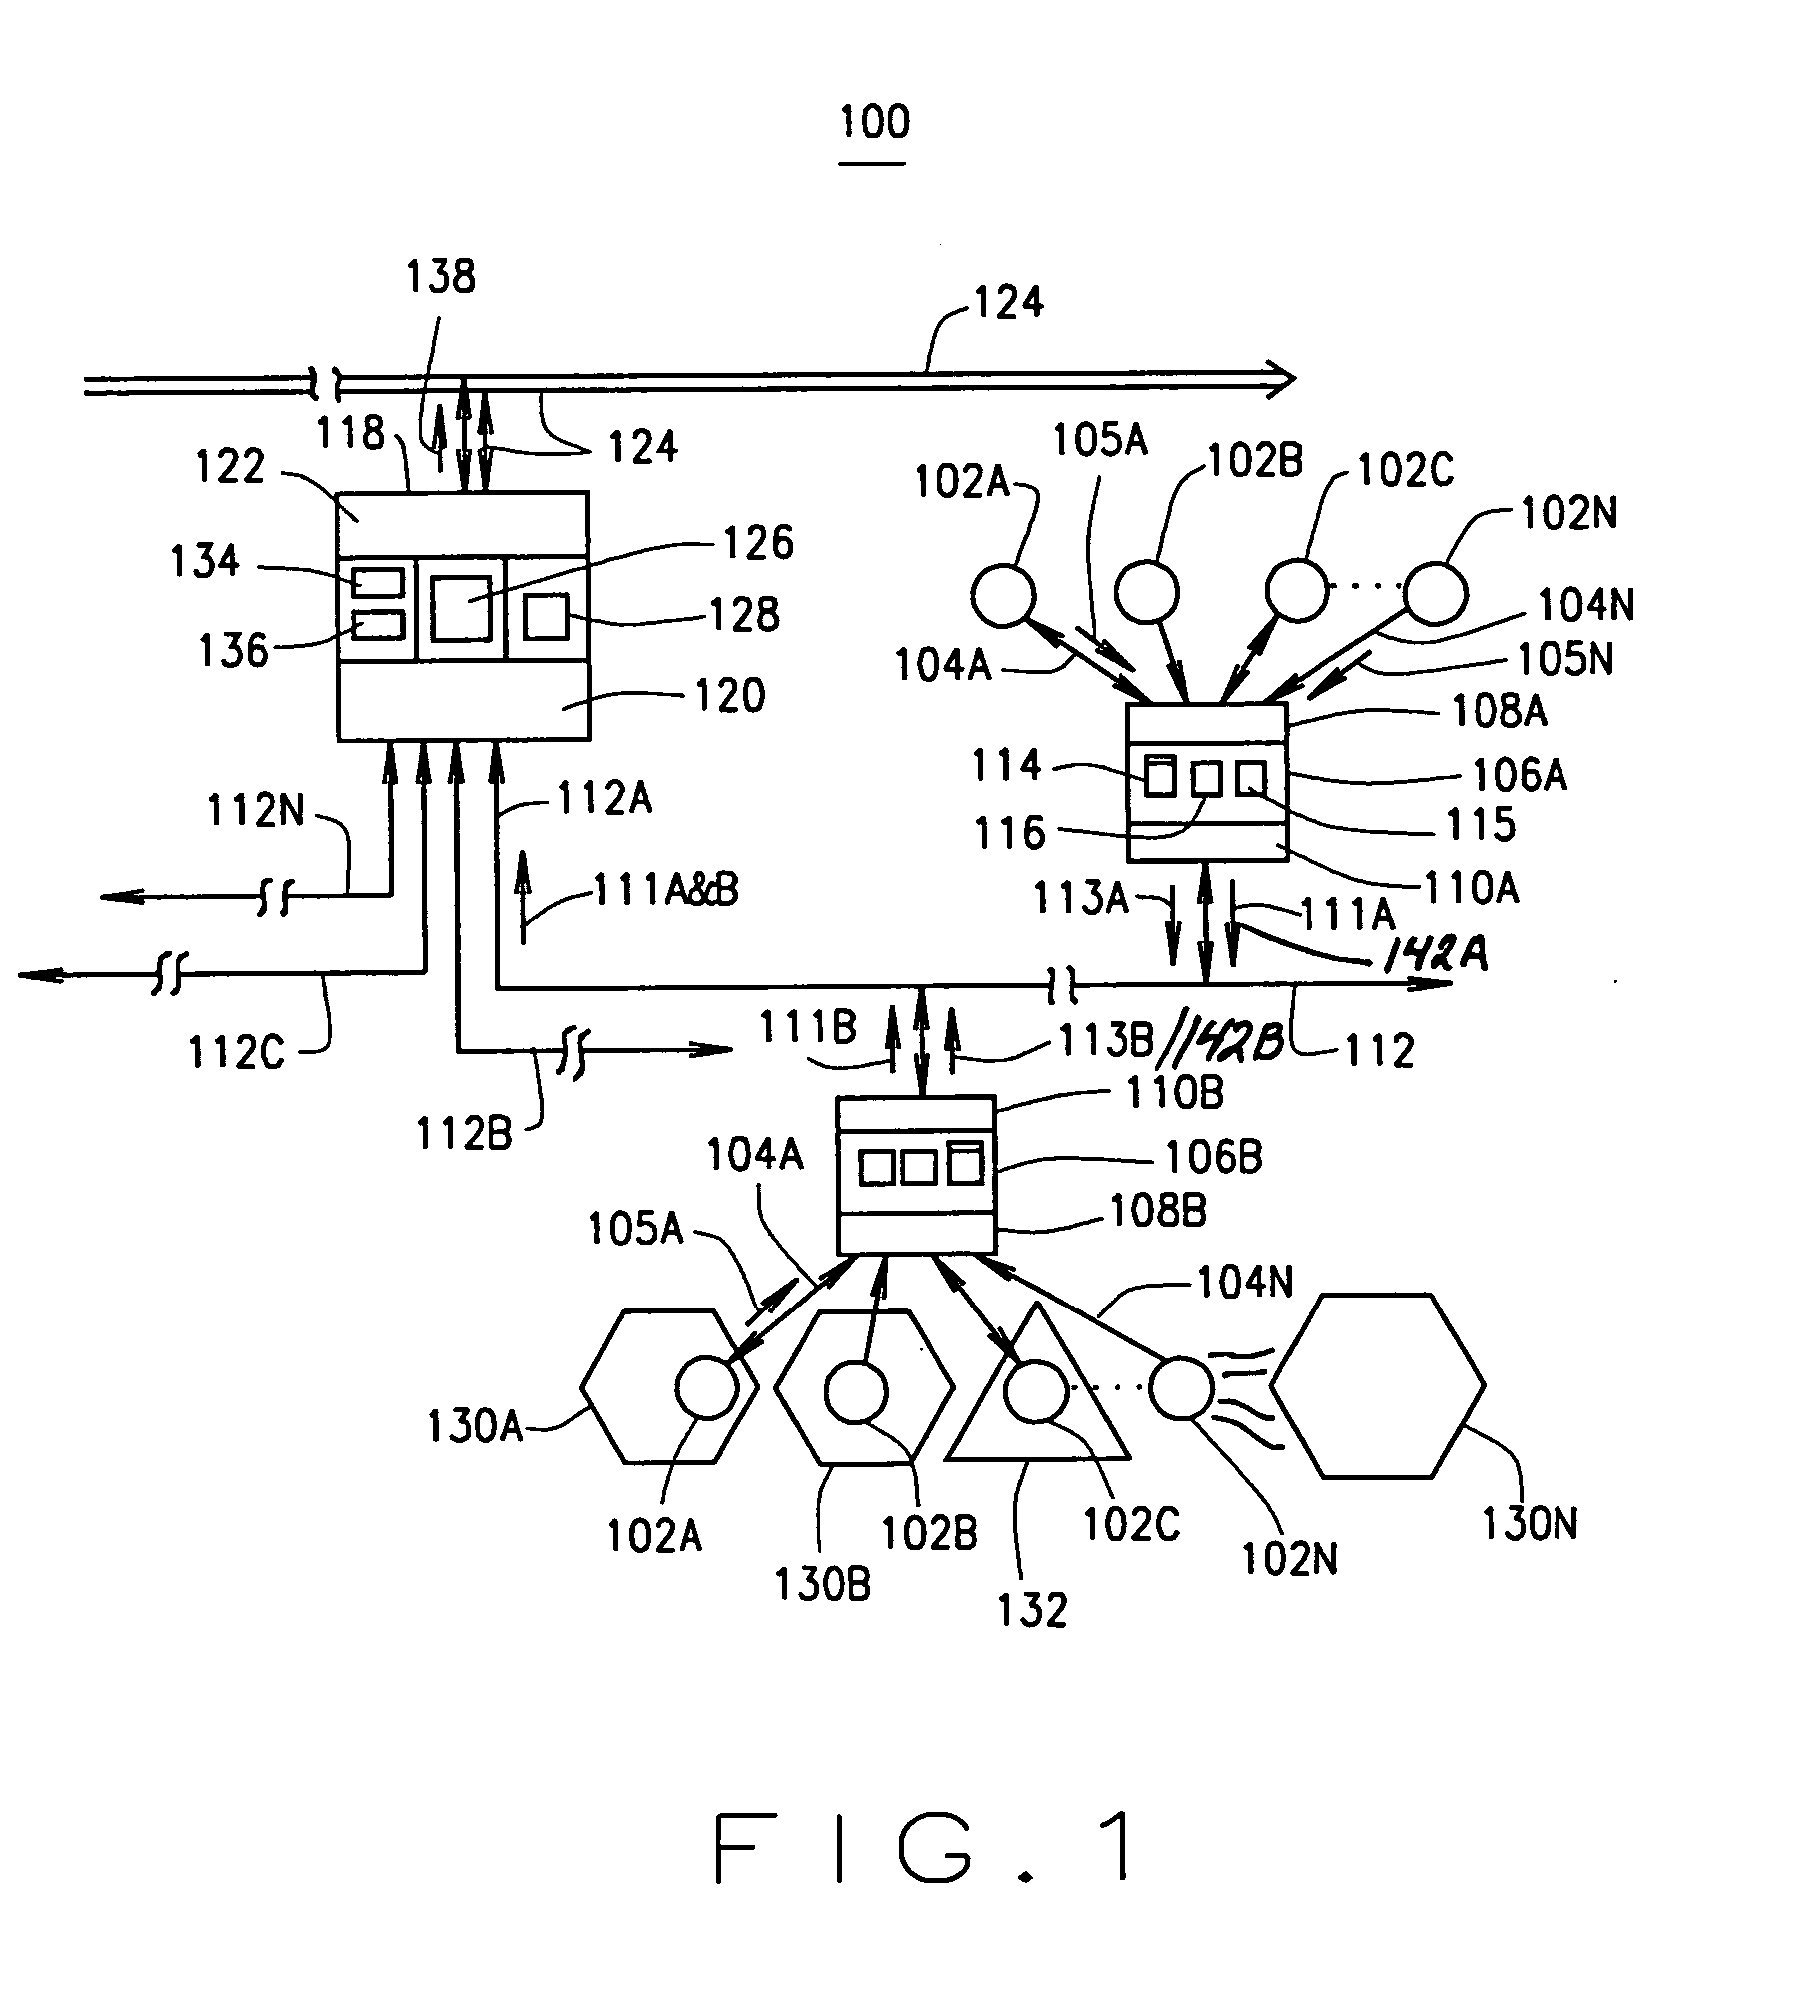 Distributed diagnostic operations system